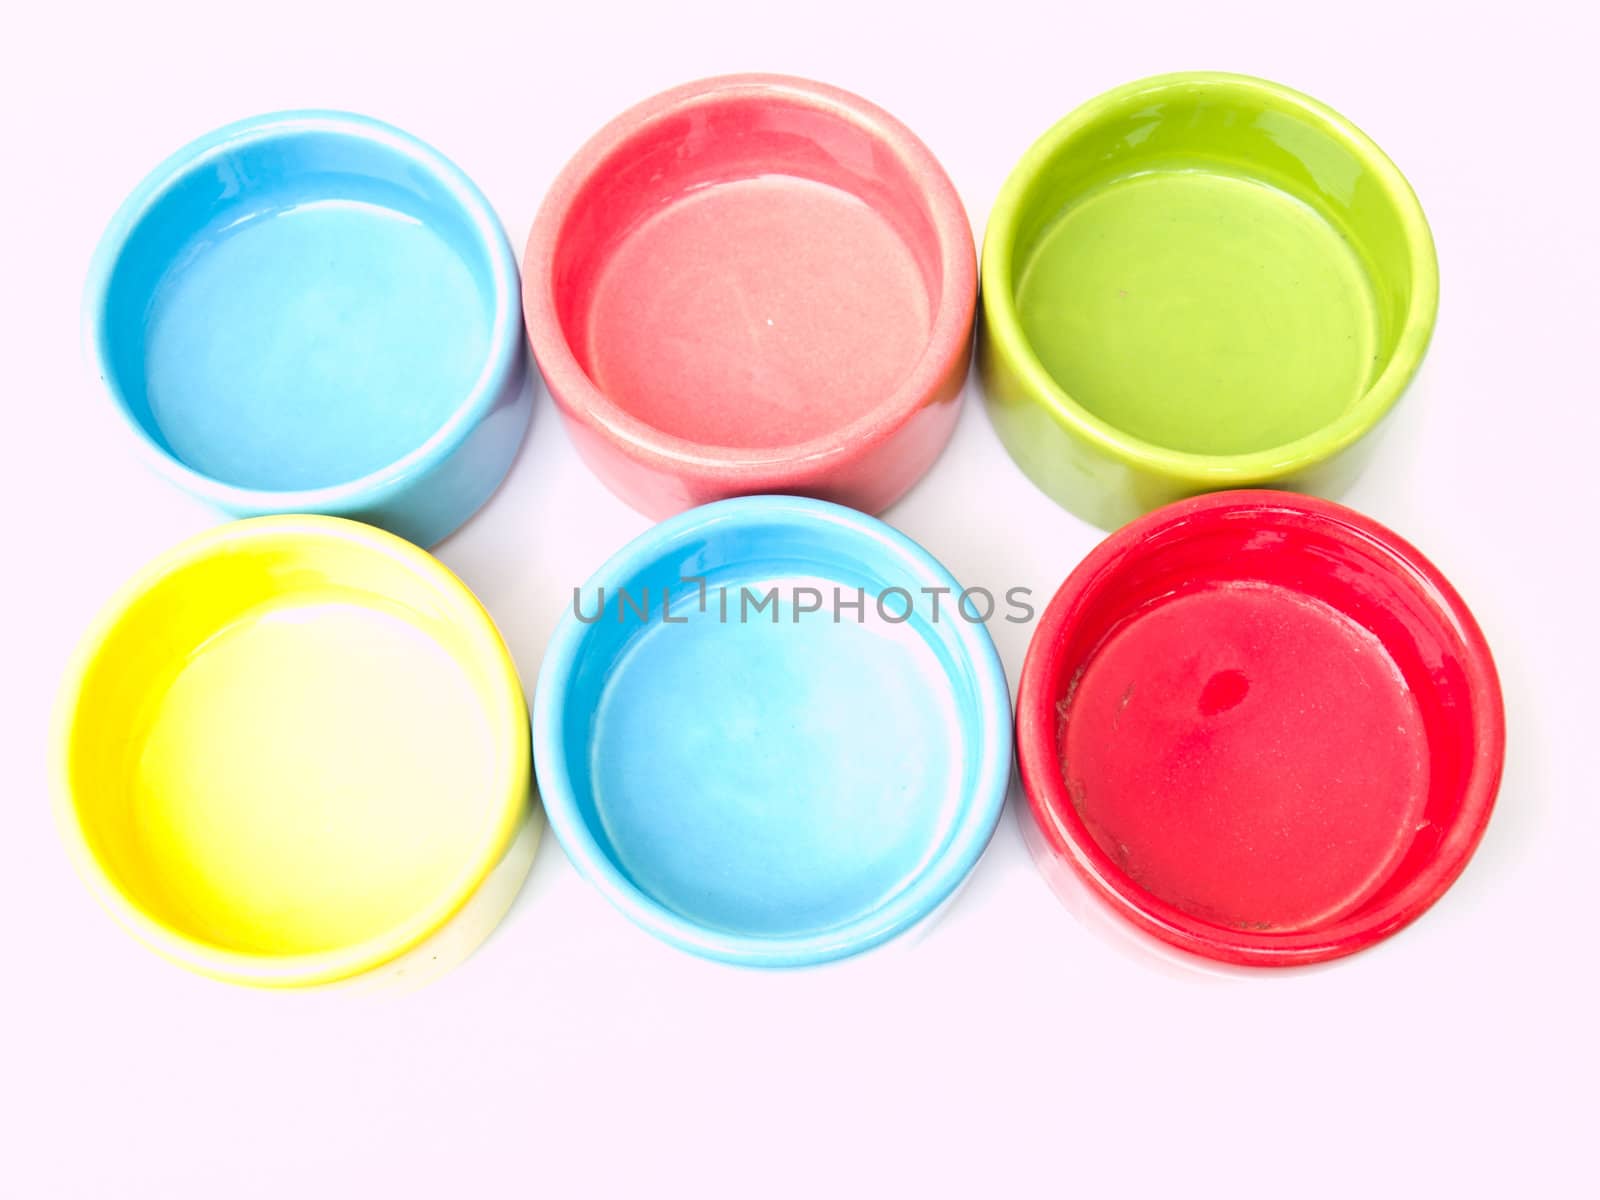 Colorful ceramic candle handles from topview isolated on white b by gururugu